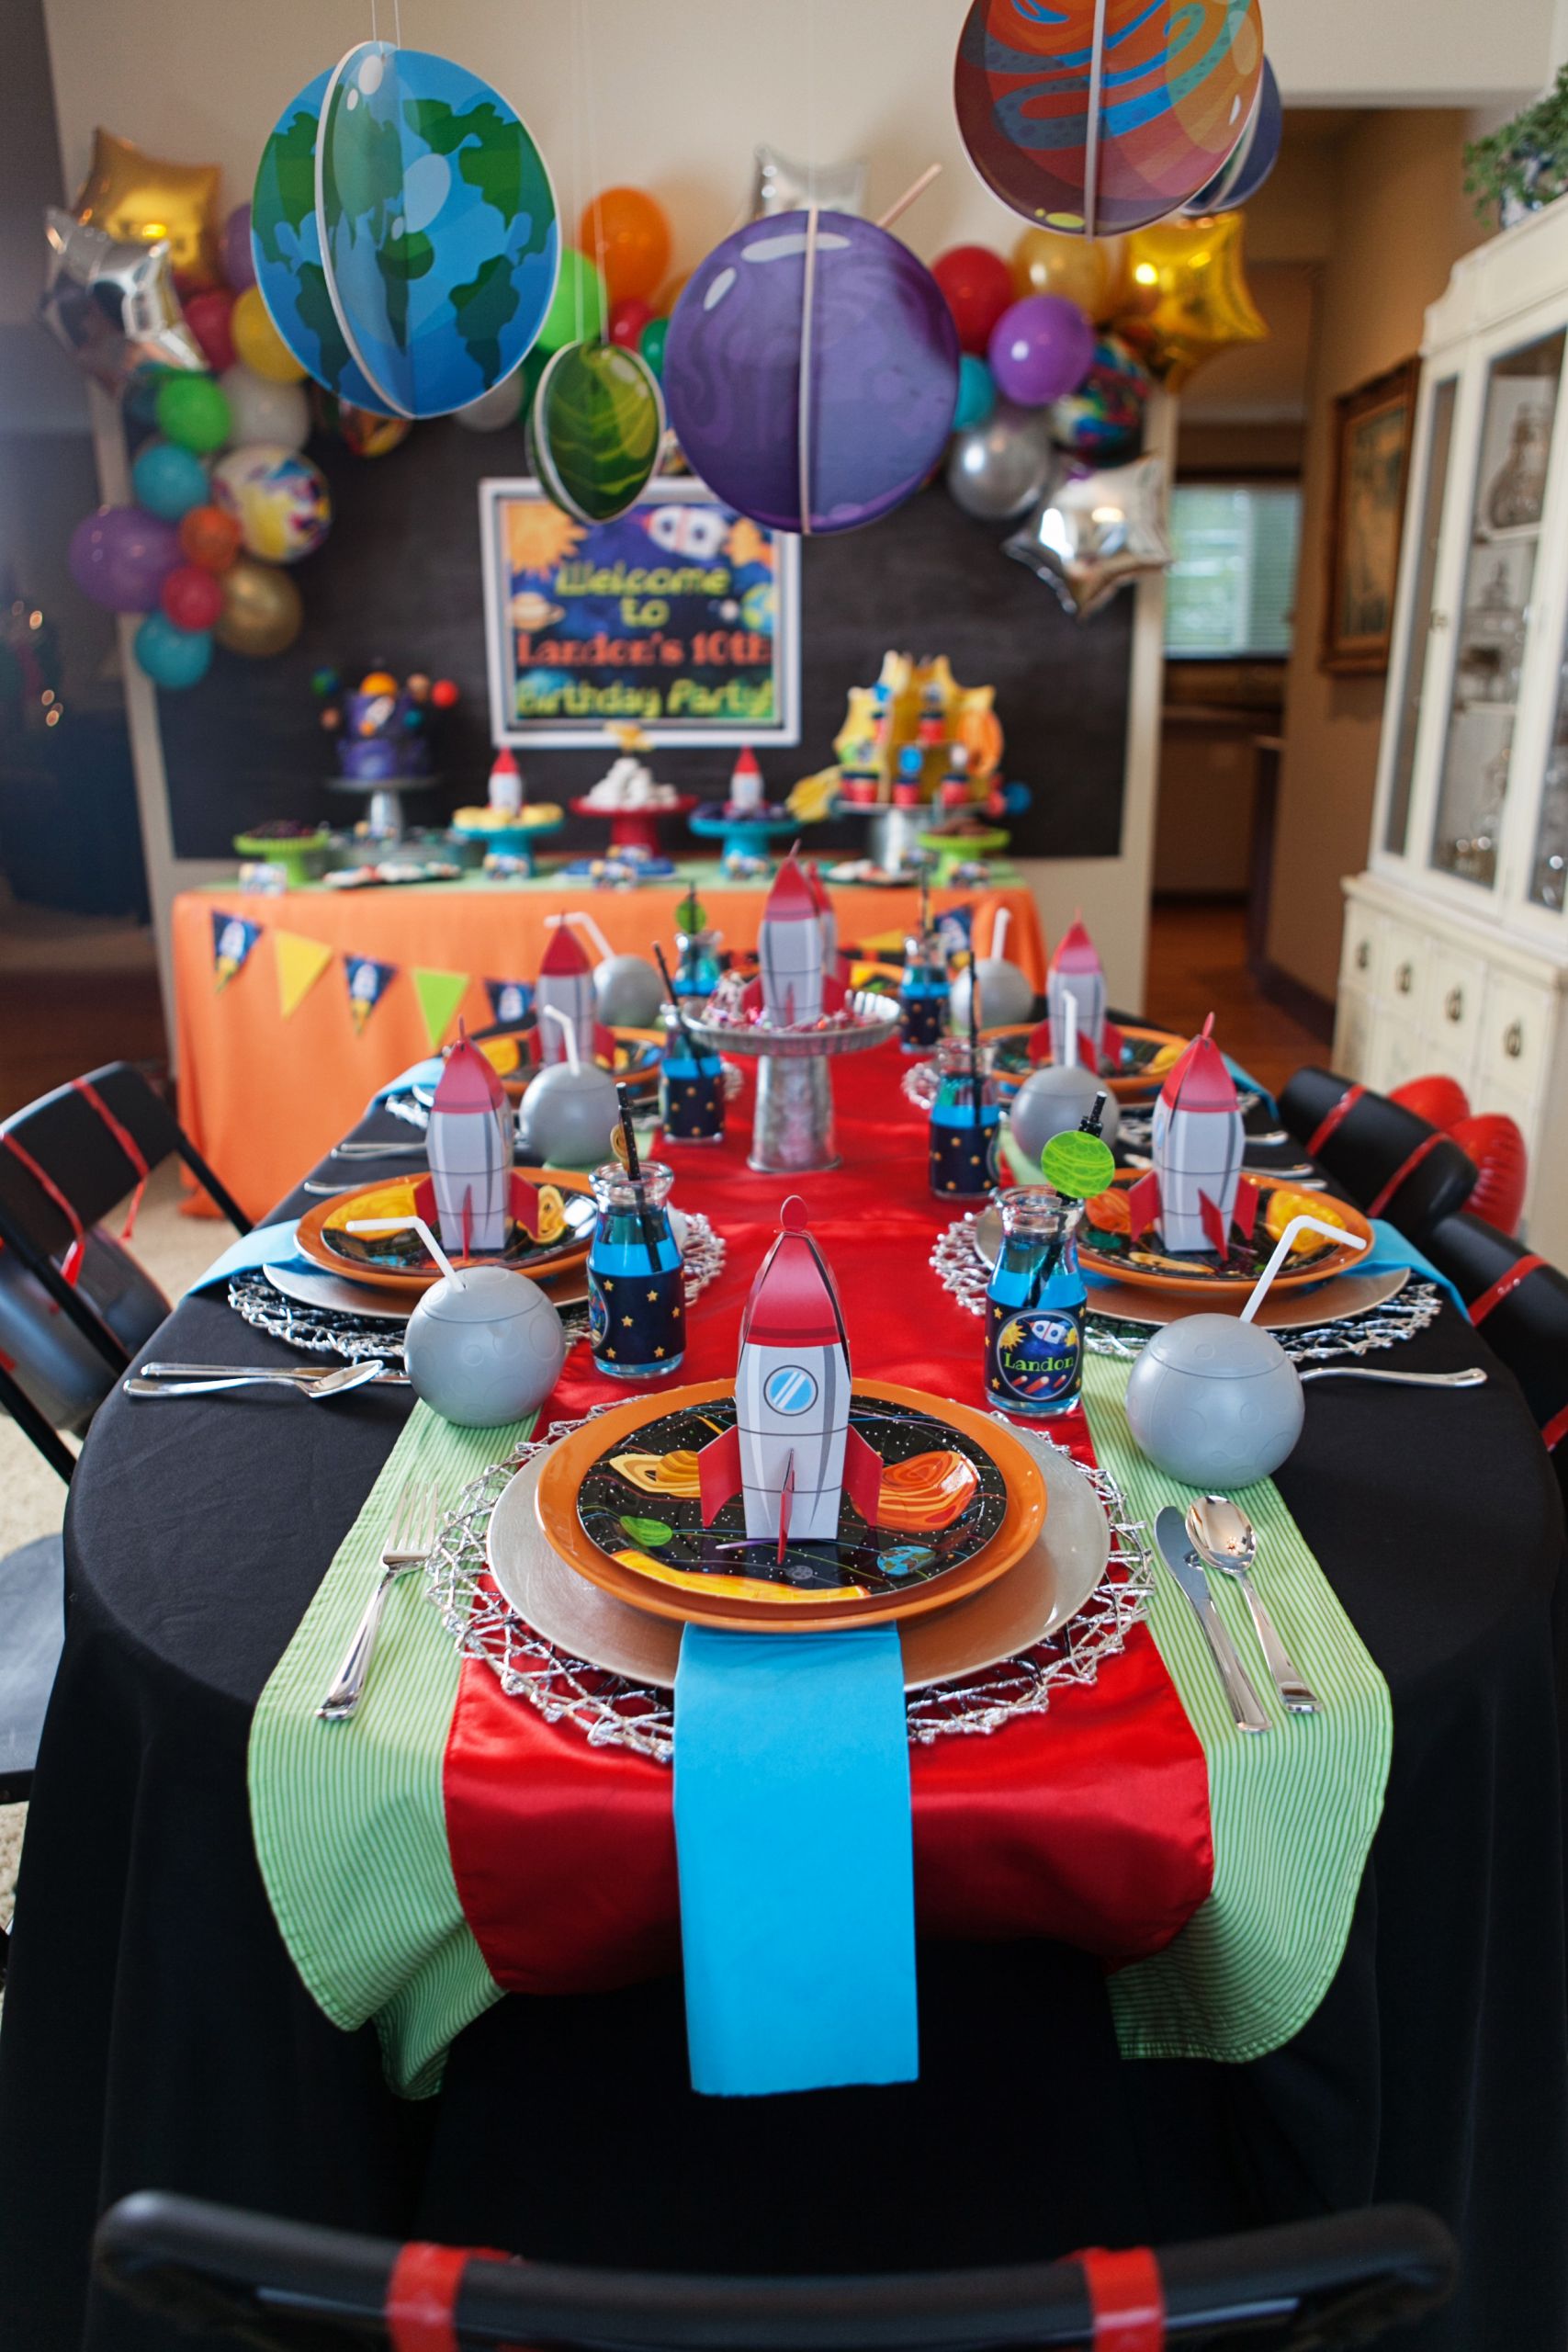 Space Birthday Party Supplies
 An Out of this World Boy’s Space Themed Birthday Party